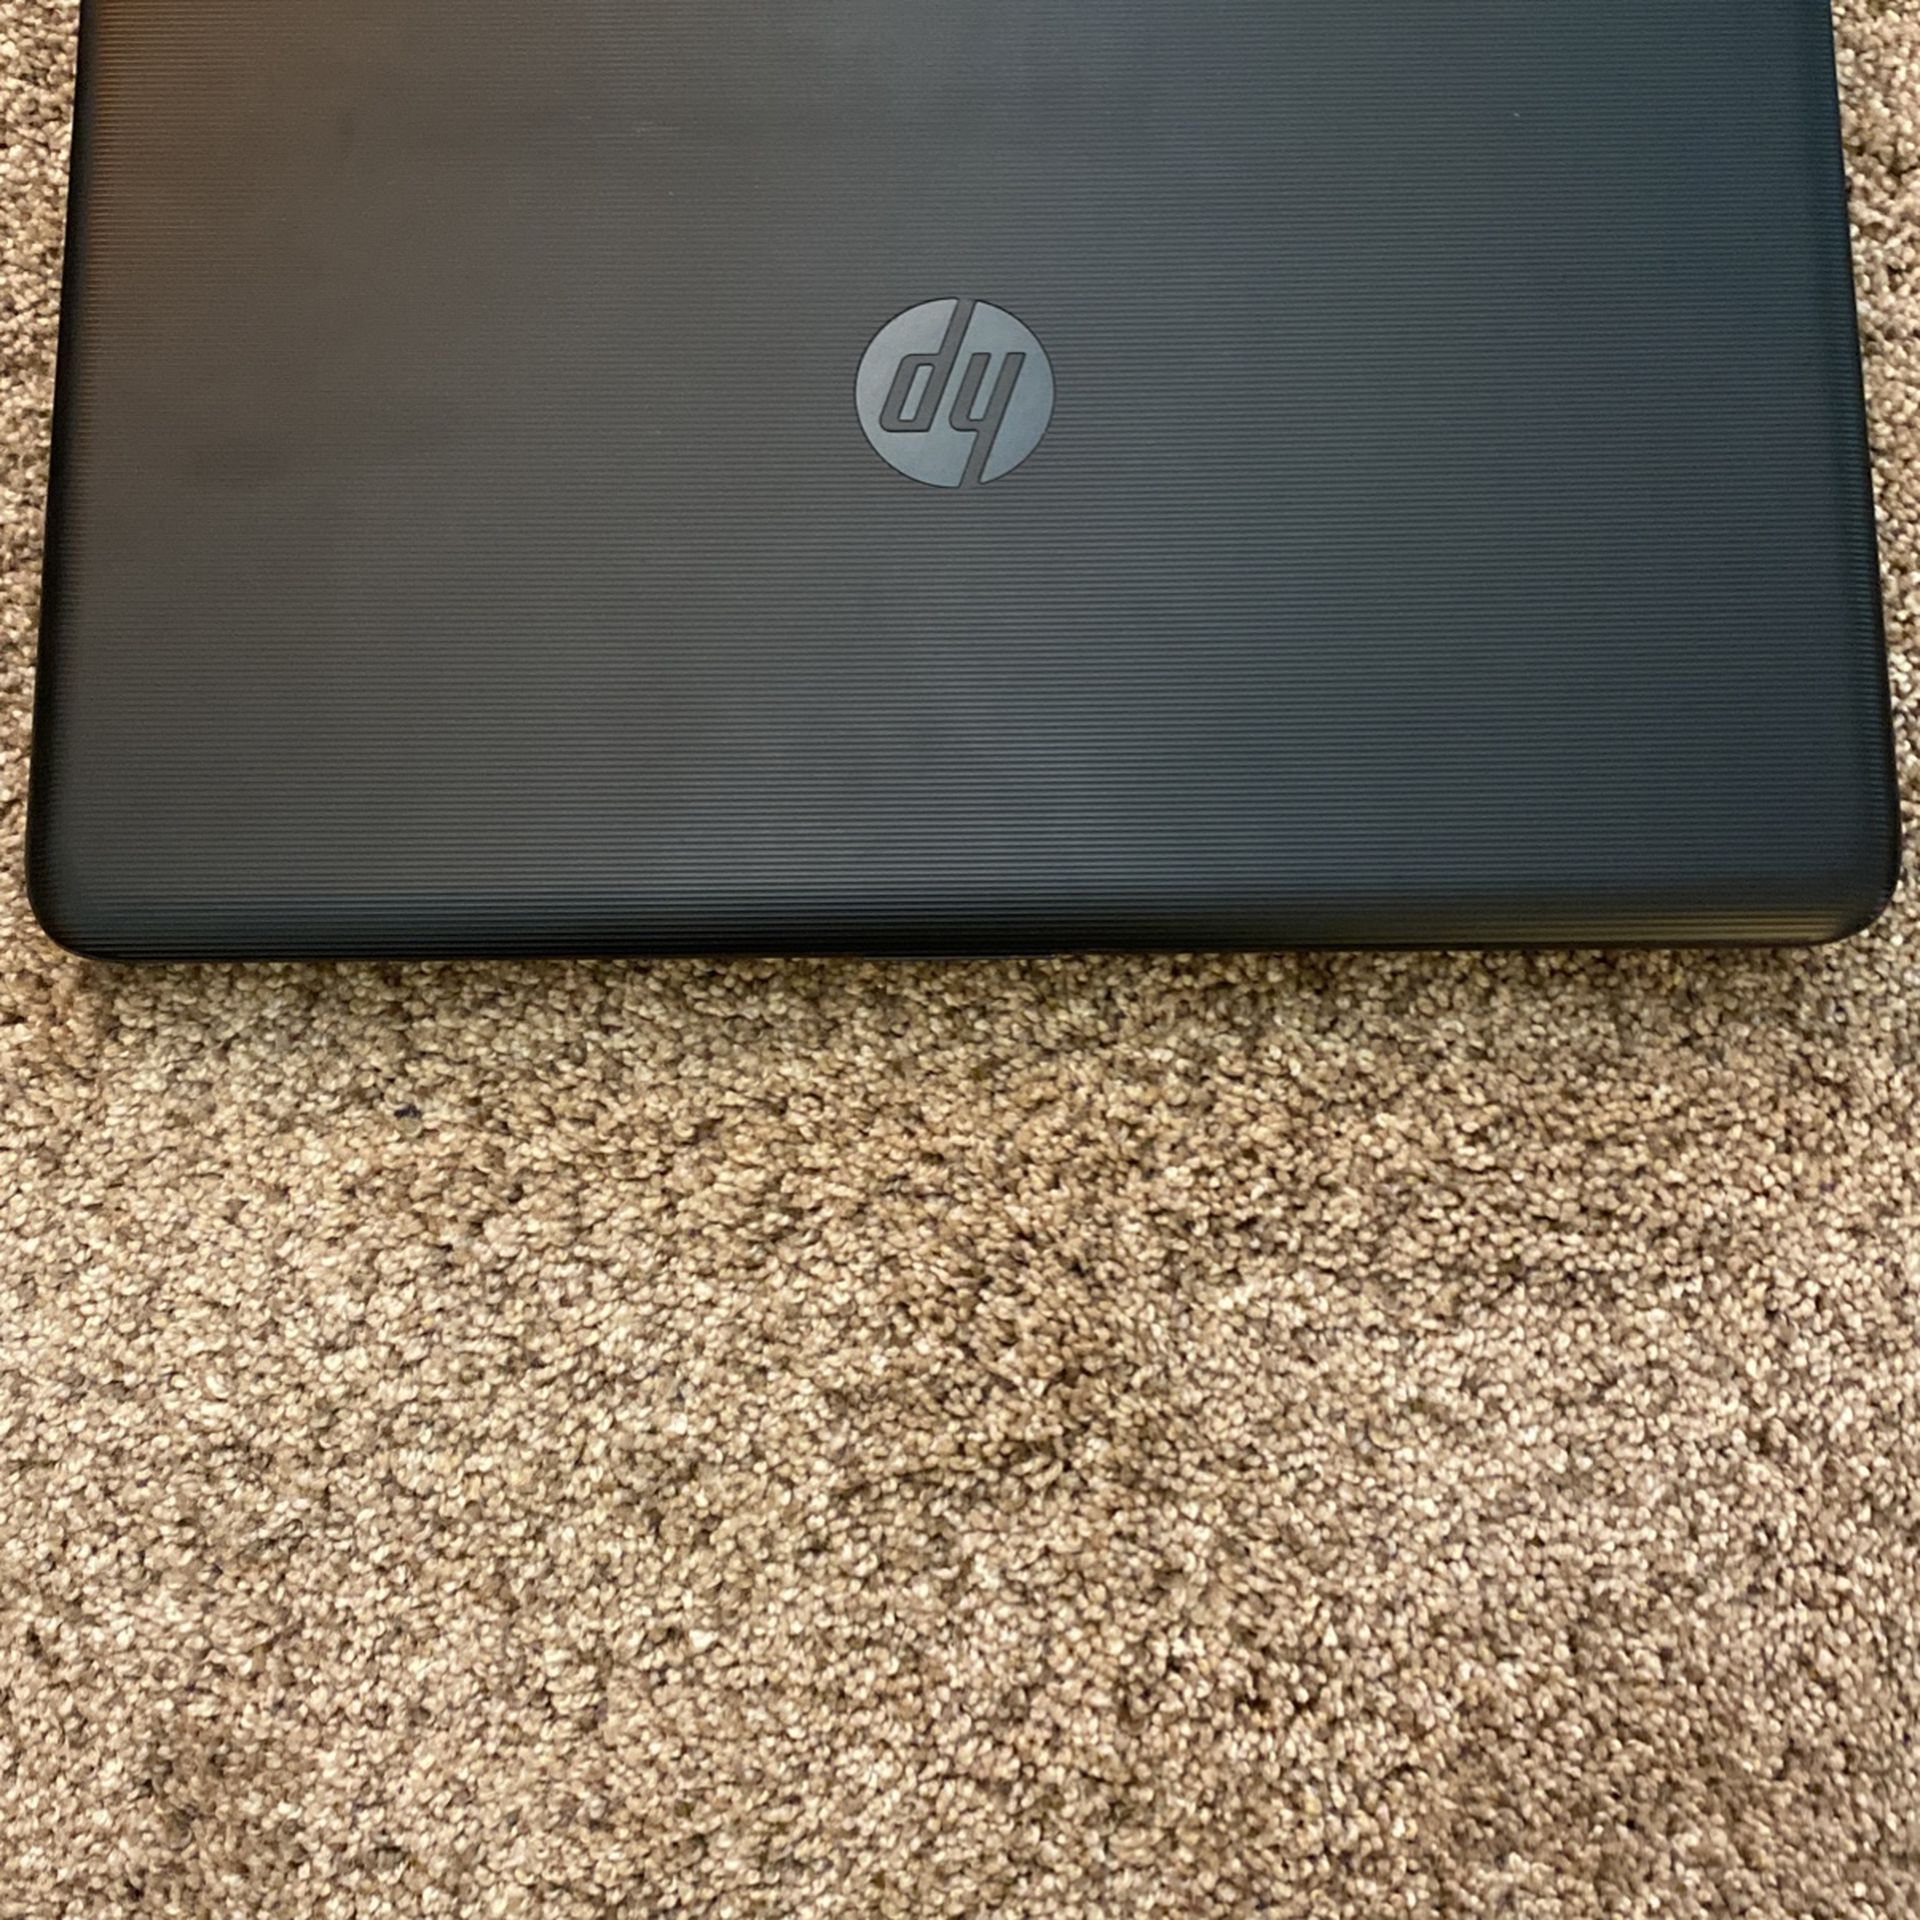 Touch Screen HP Notebook. Great Condition 